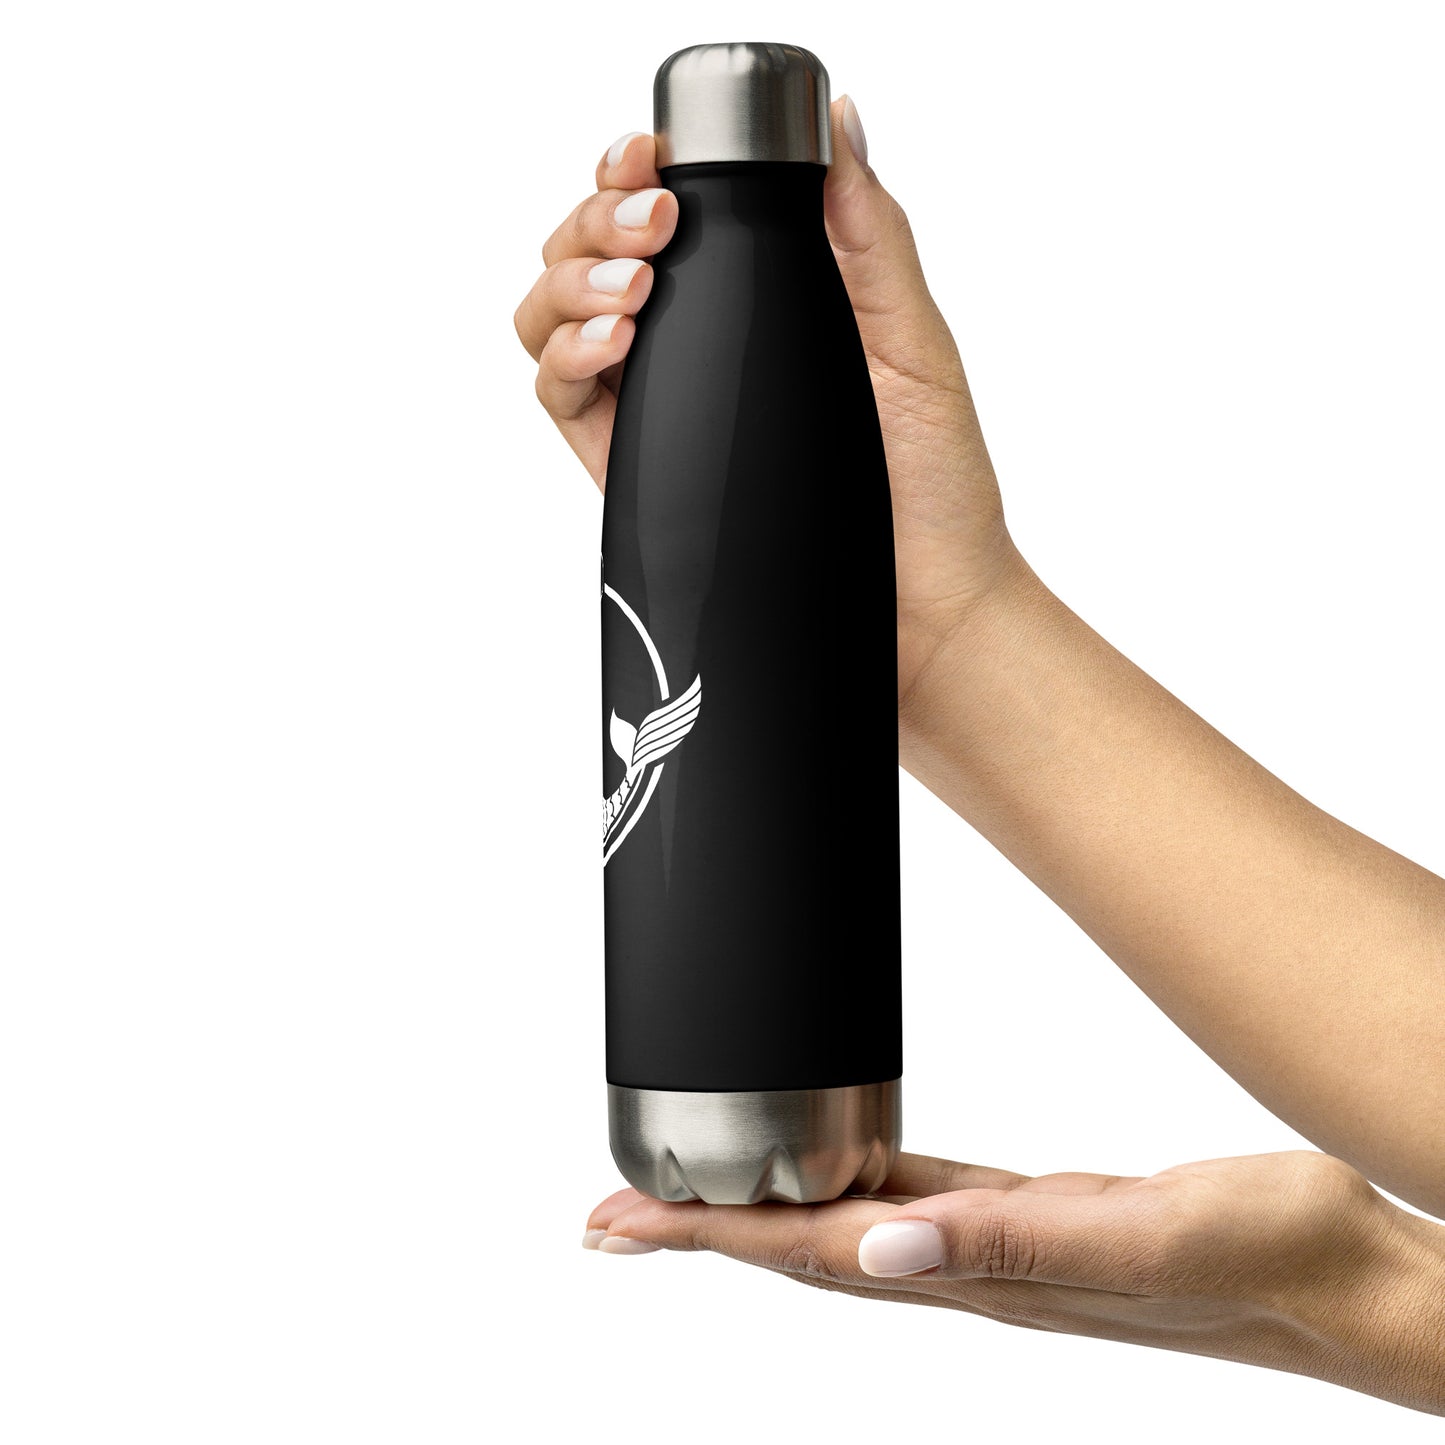 Sirens of Gotham - Stainless steel water bottle